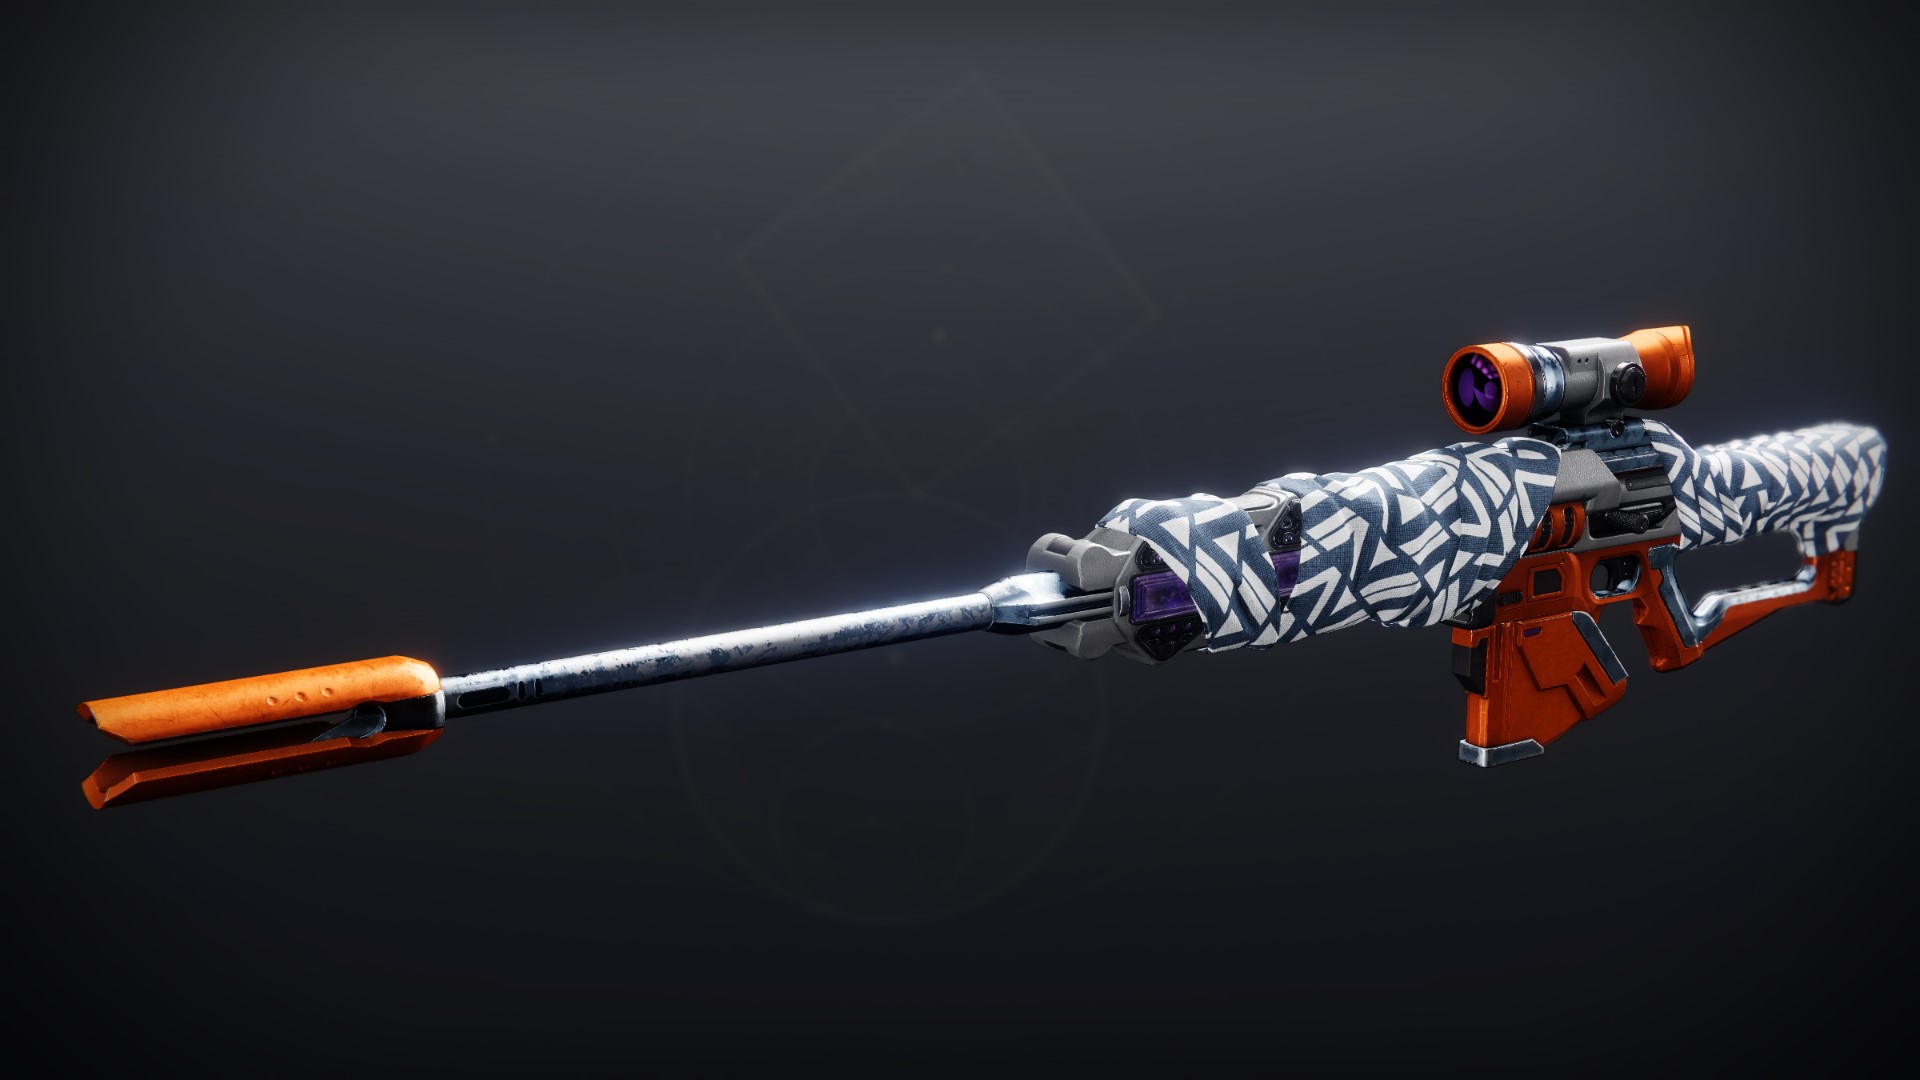 An in-game render of the Balistraria Wrap (Ornament).